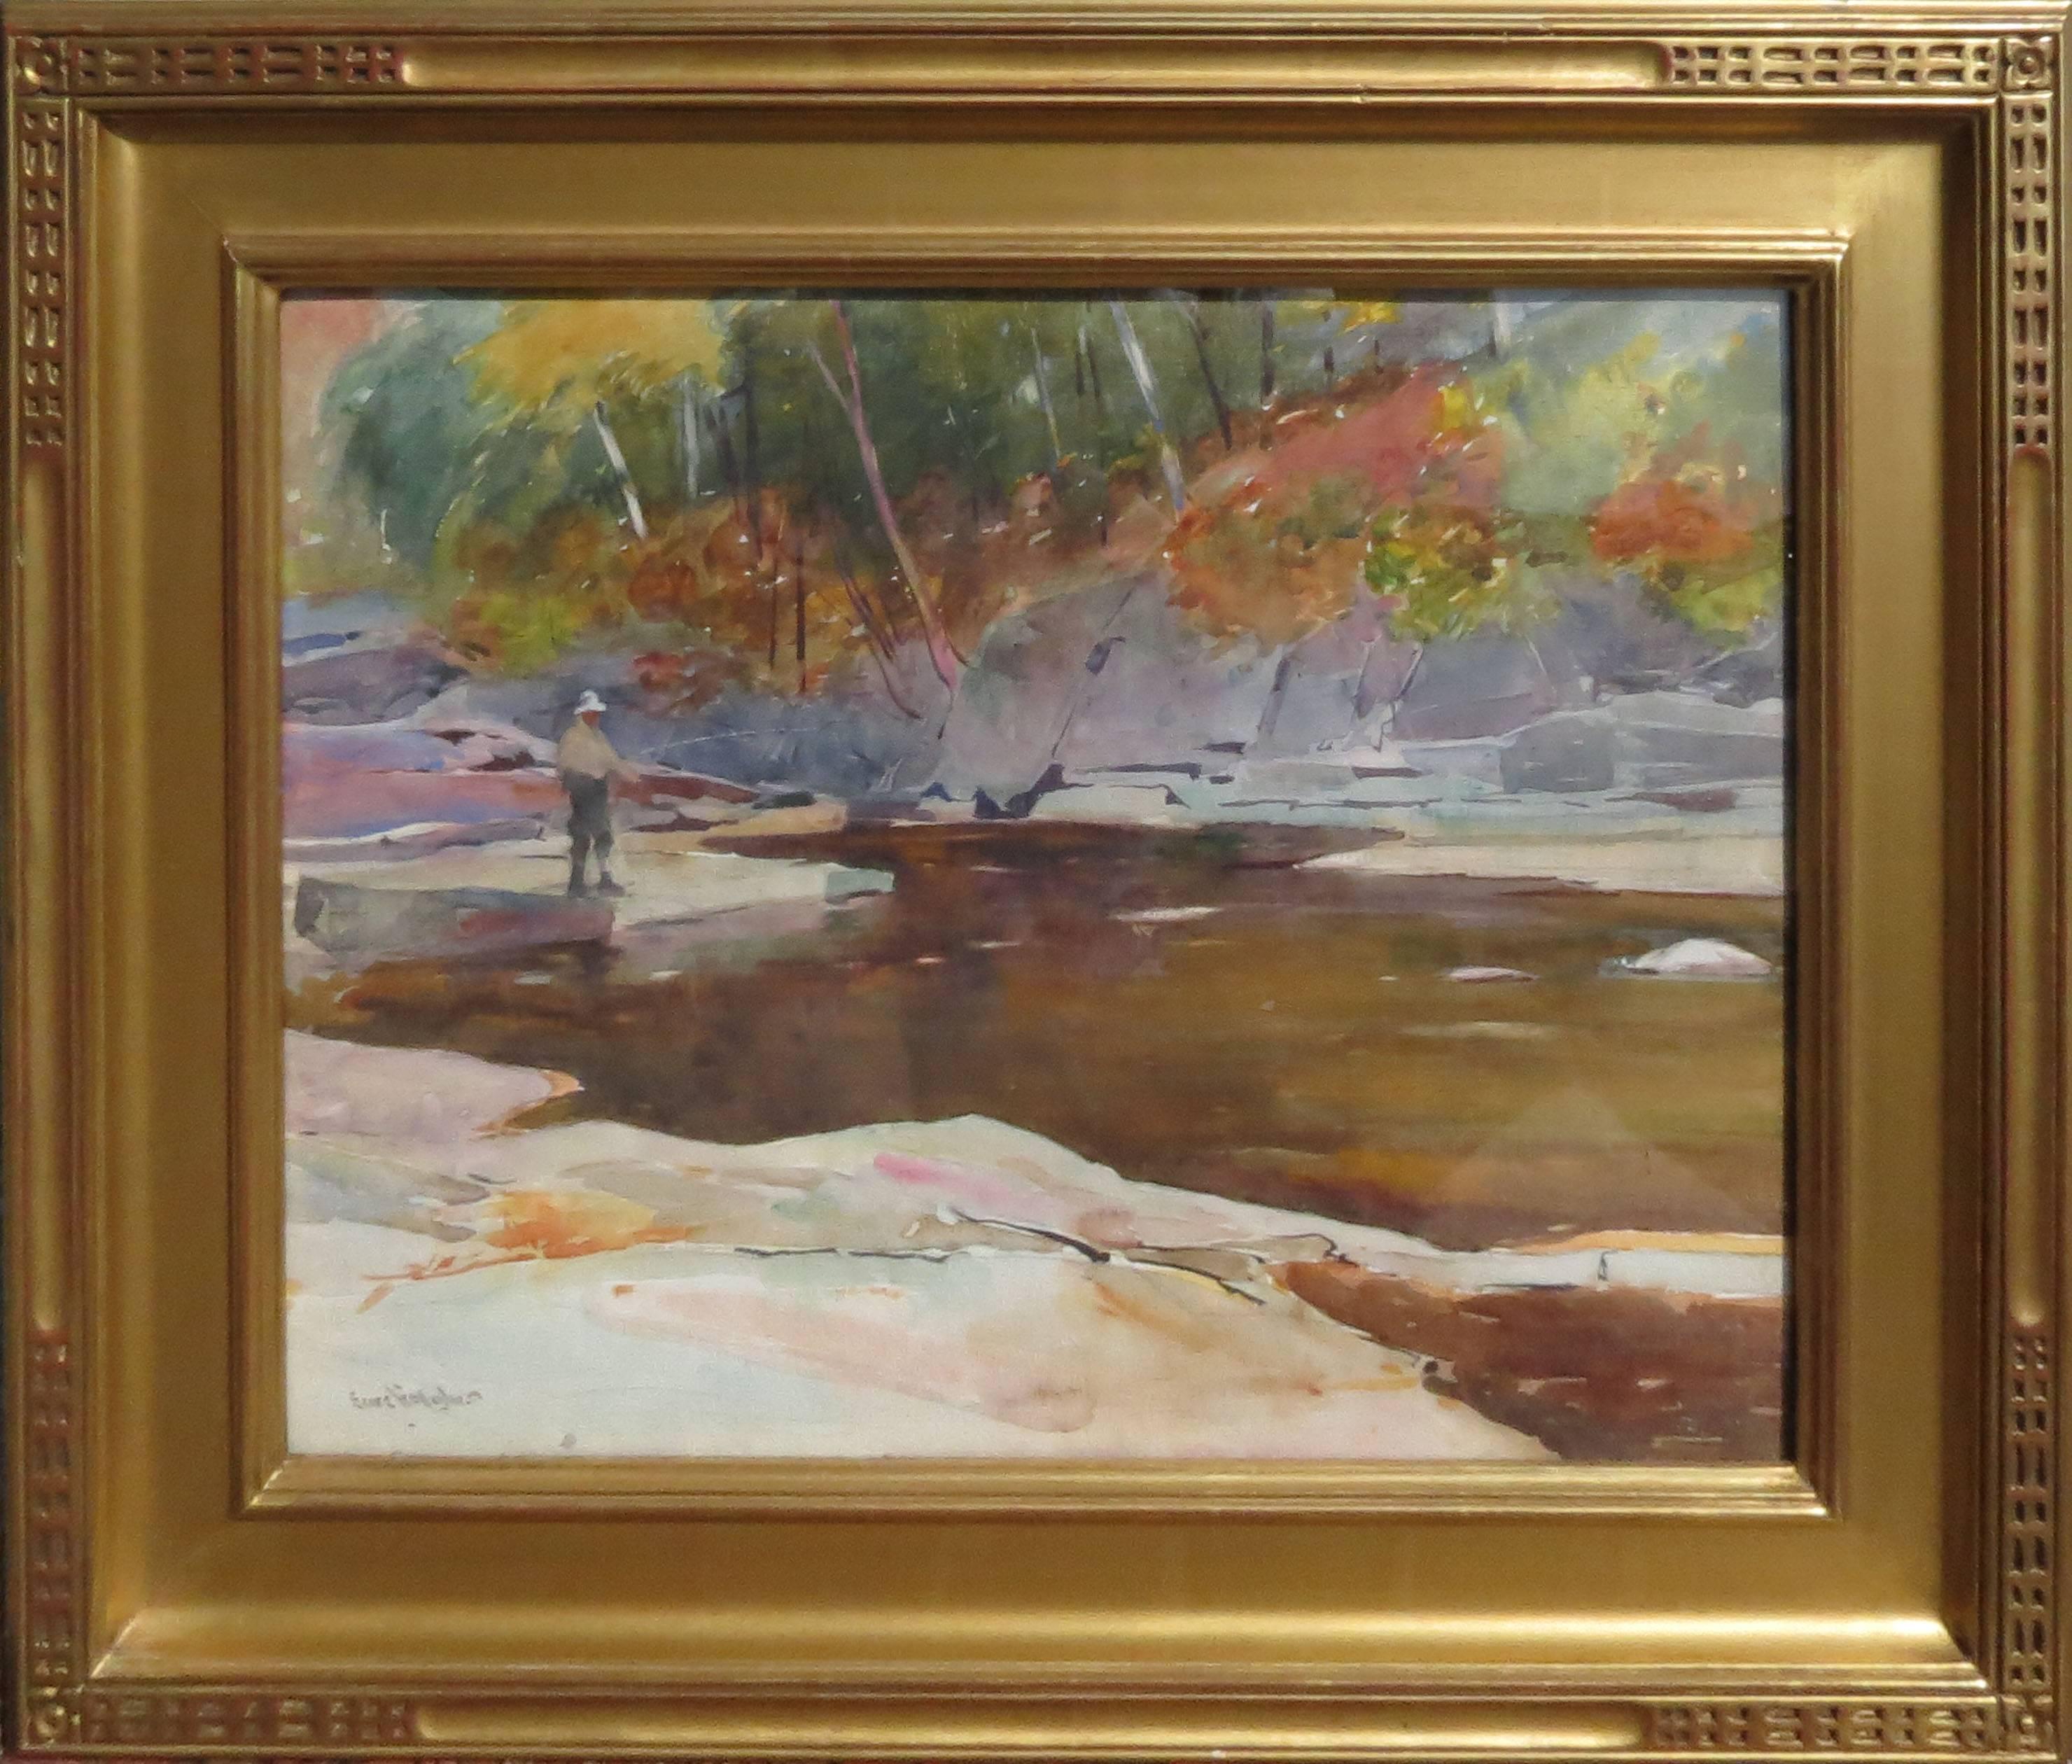 Sears Gallagher Landscape Art - "Fishing, New Hampshire"